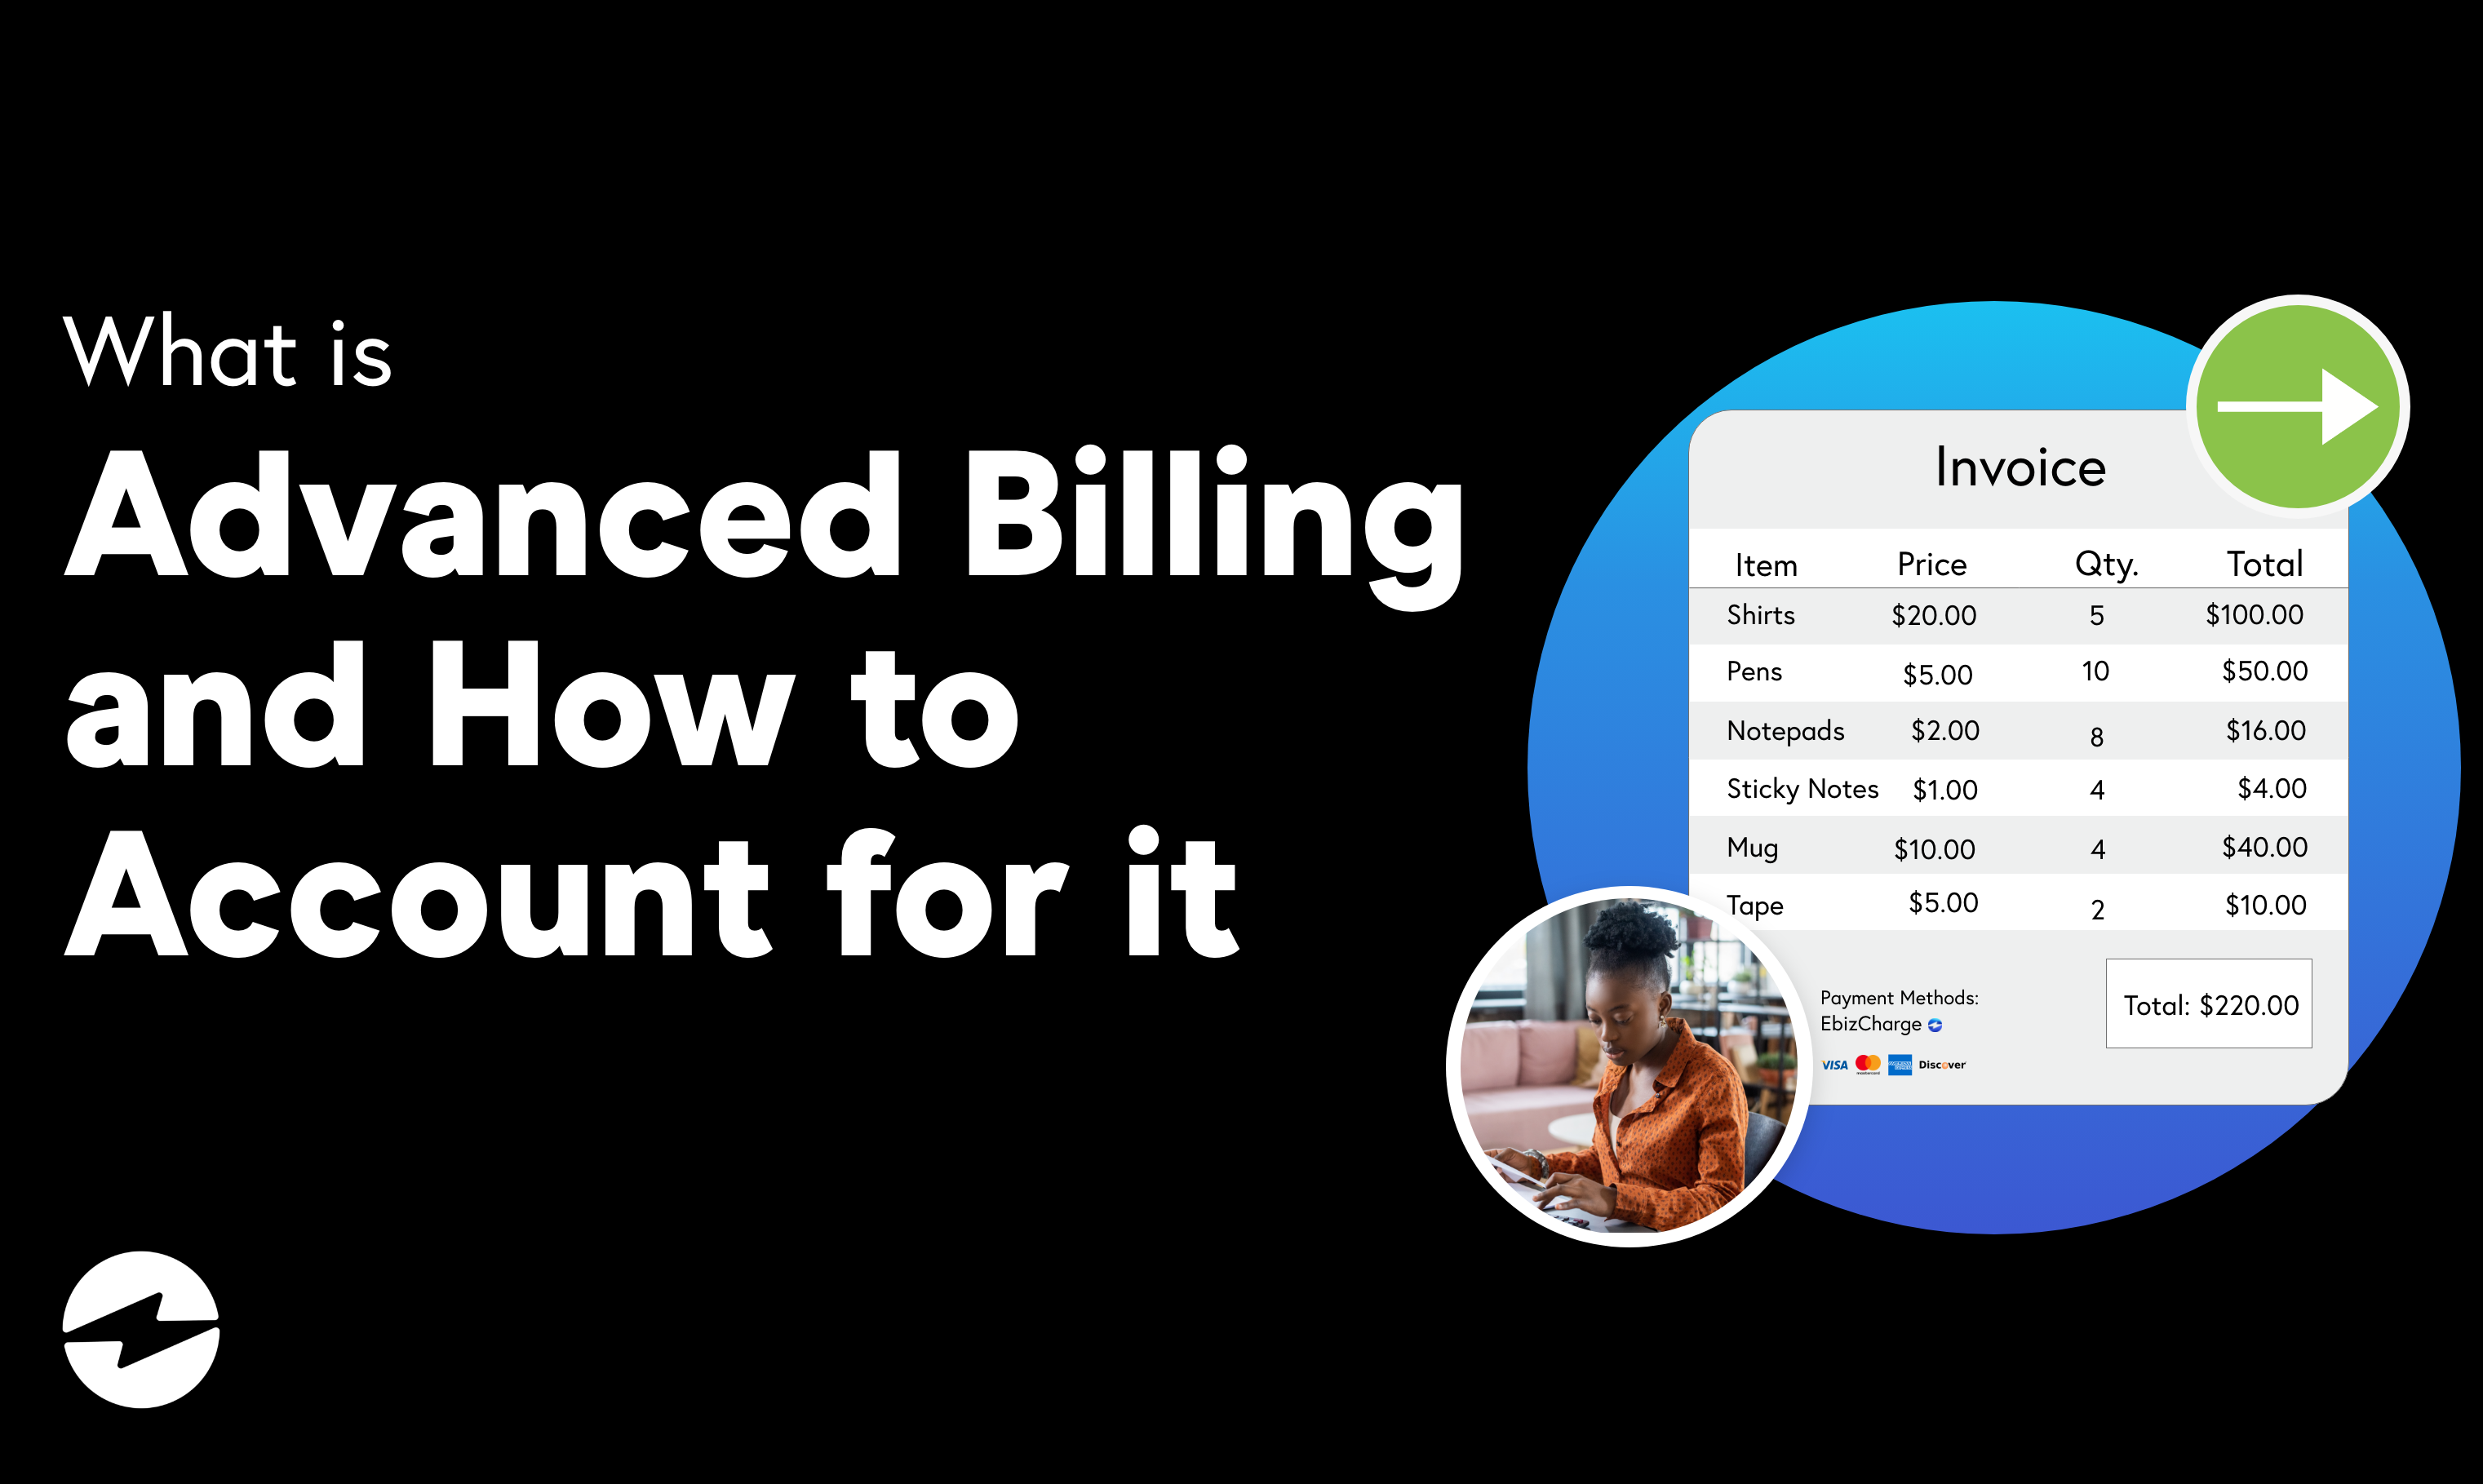 What is Advanced Billing and How to Account for it